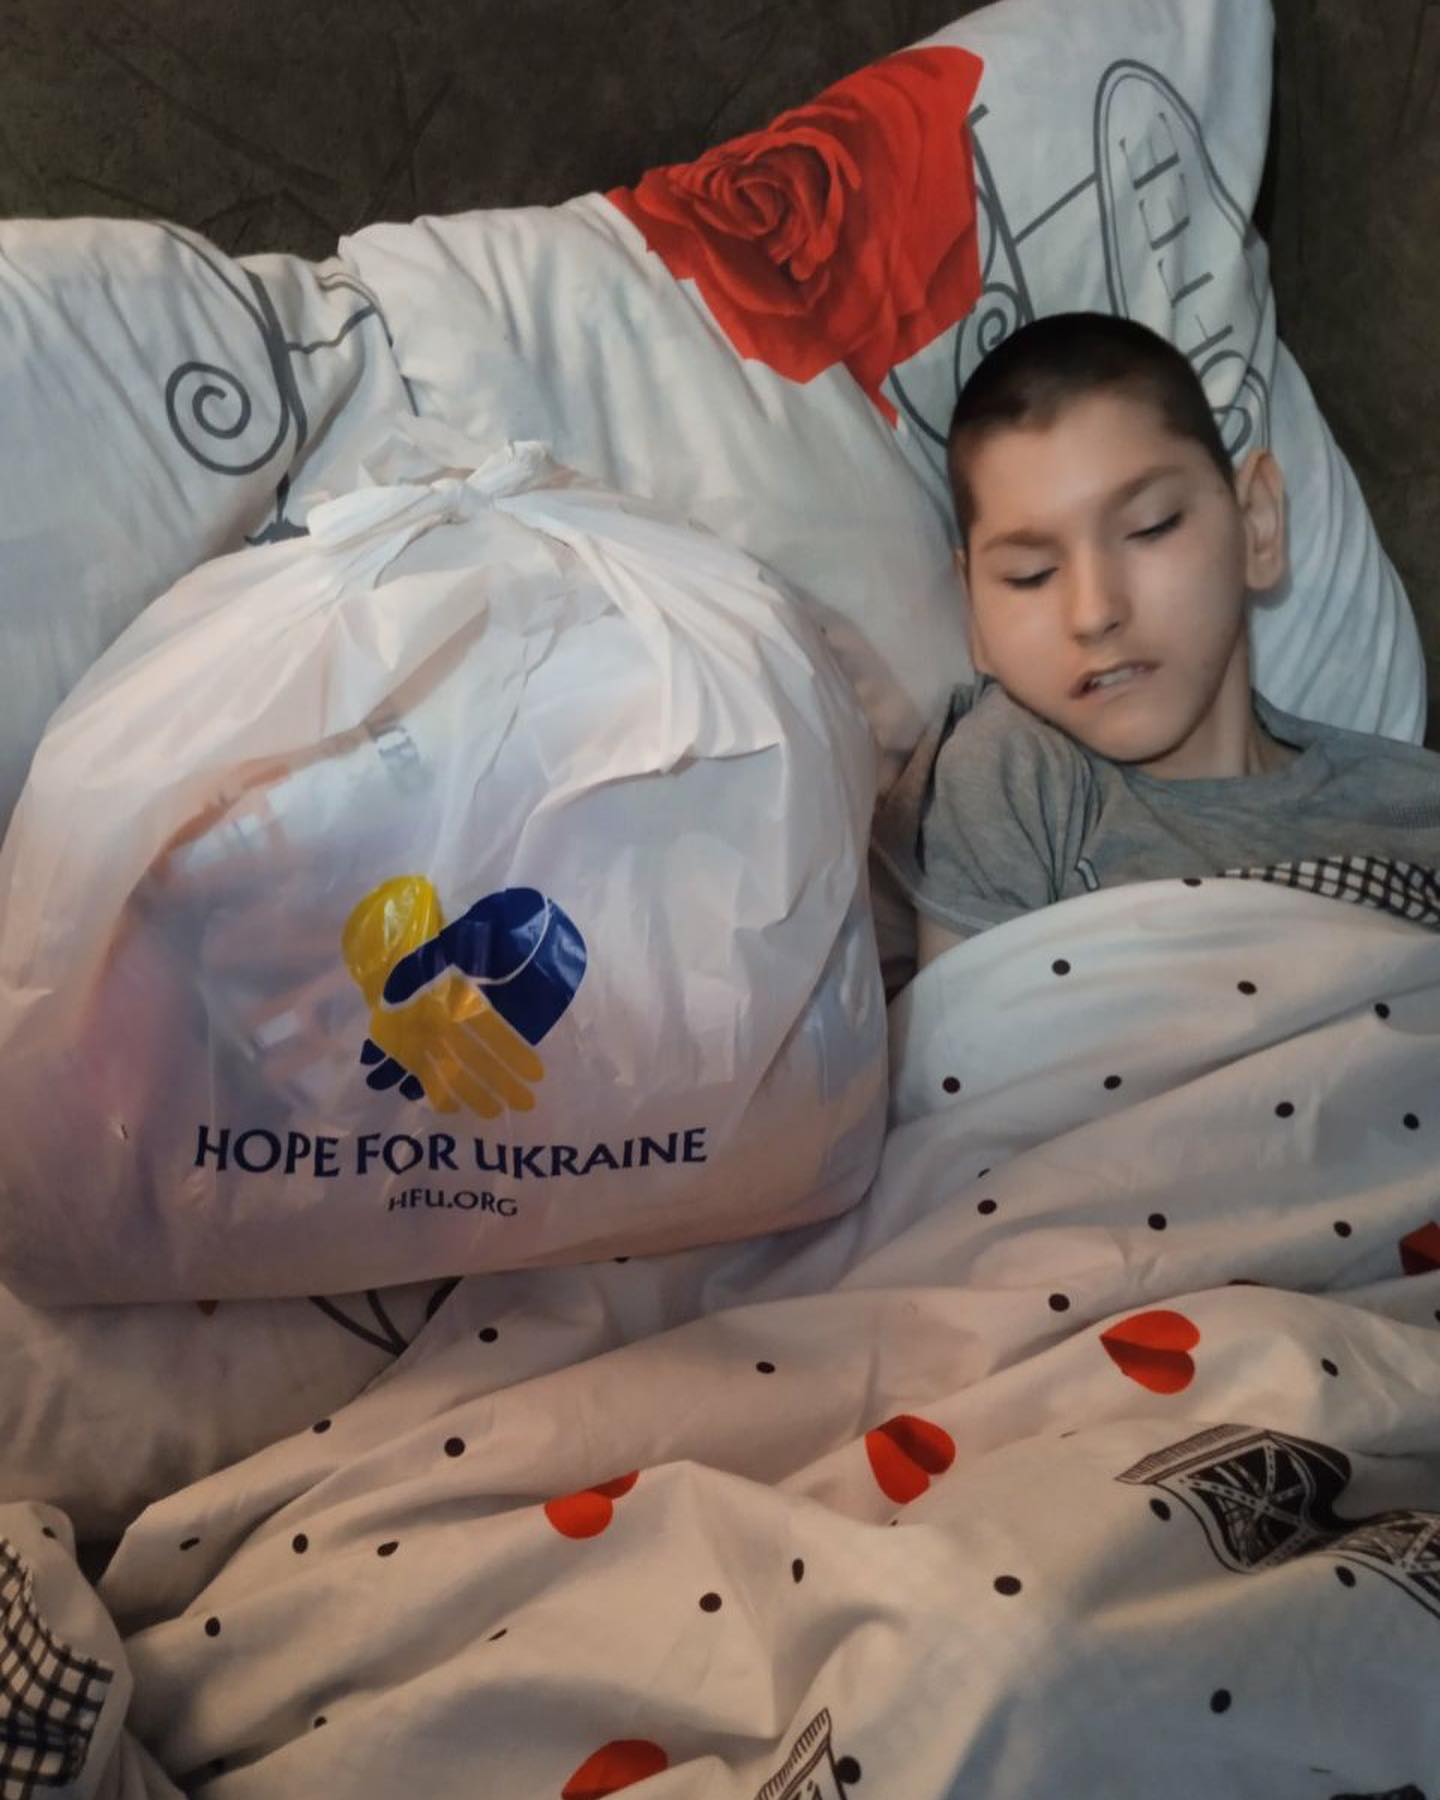 a boy is sleeping next to a bag with the word hope for ukraine.